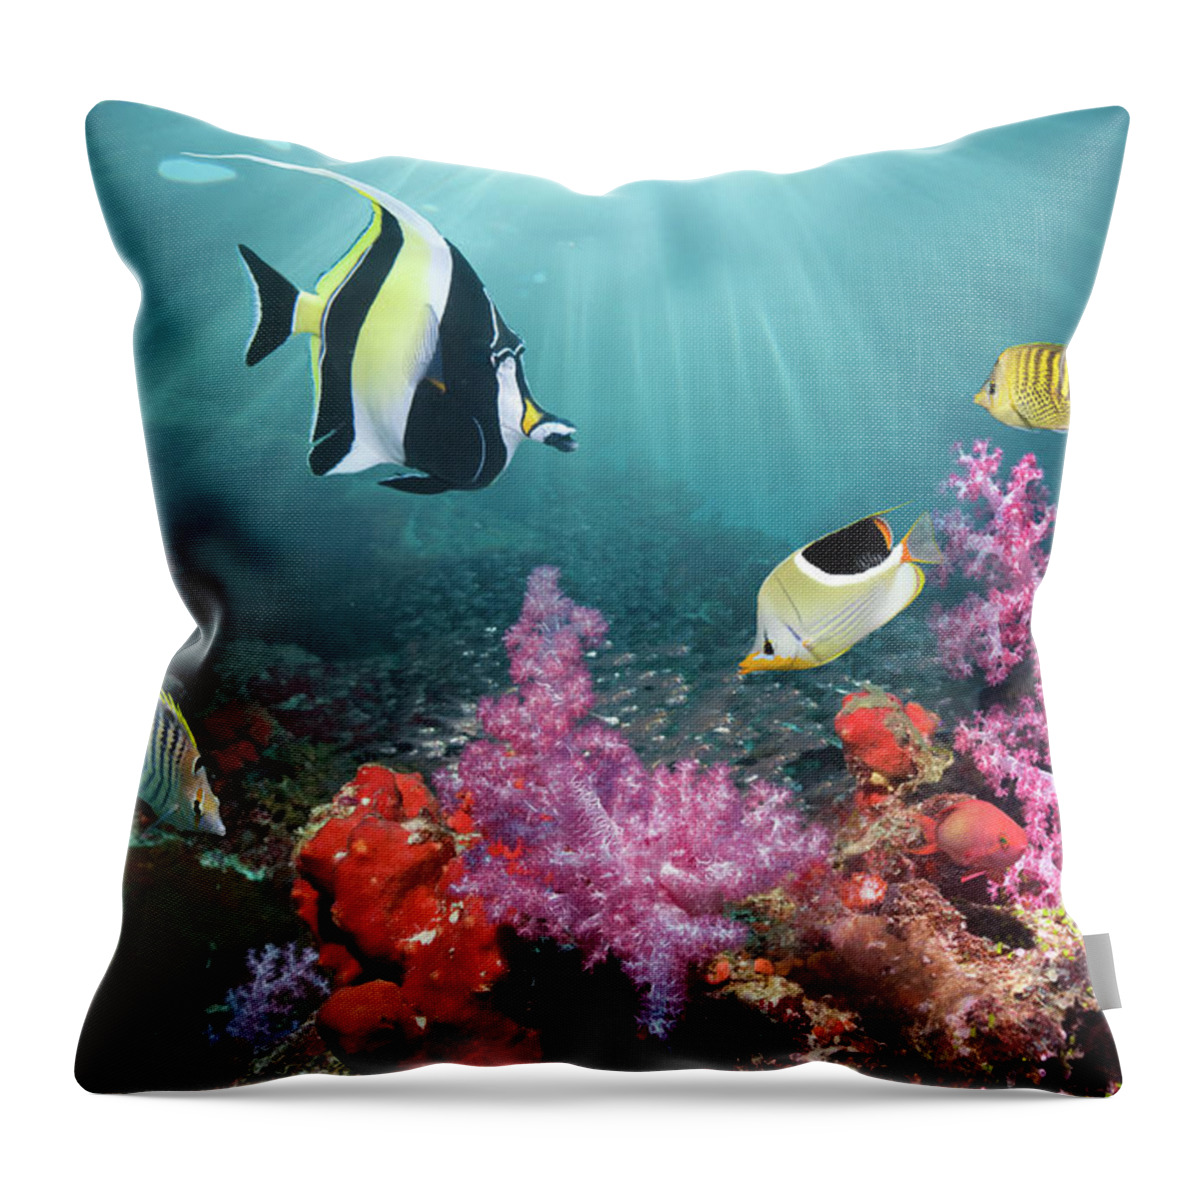 Tranquility Throw Pillow featuring the photograph Coral Reef Scenery #58 by Georgette Douwma